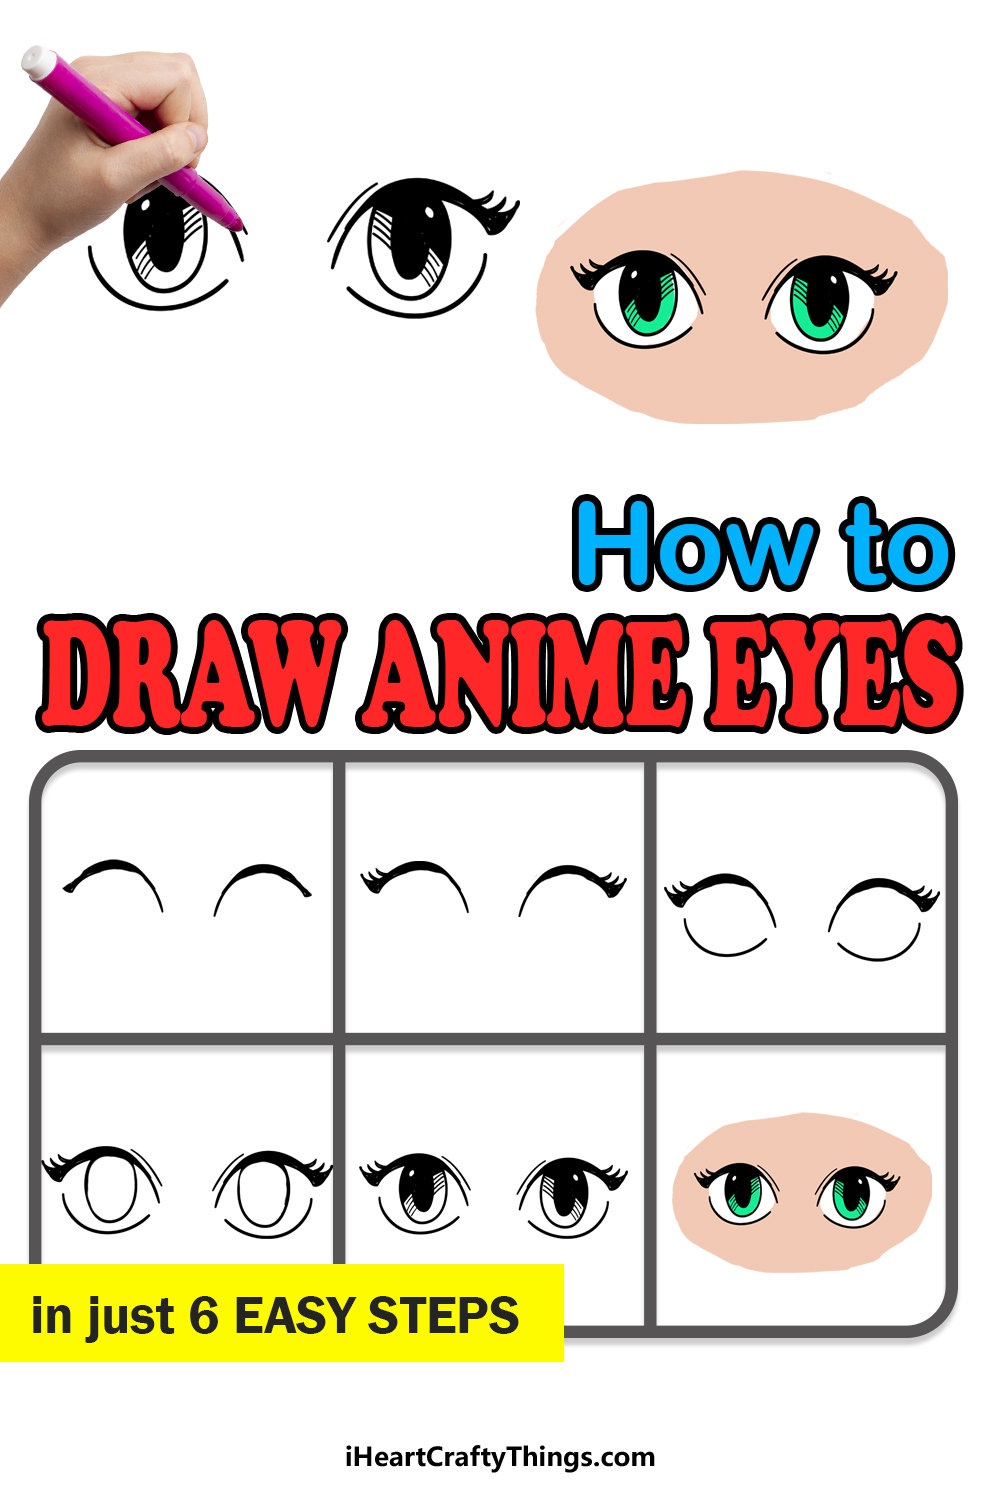 How to Draw Anime Eyes step by step guide